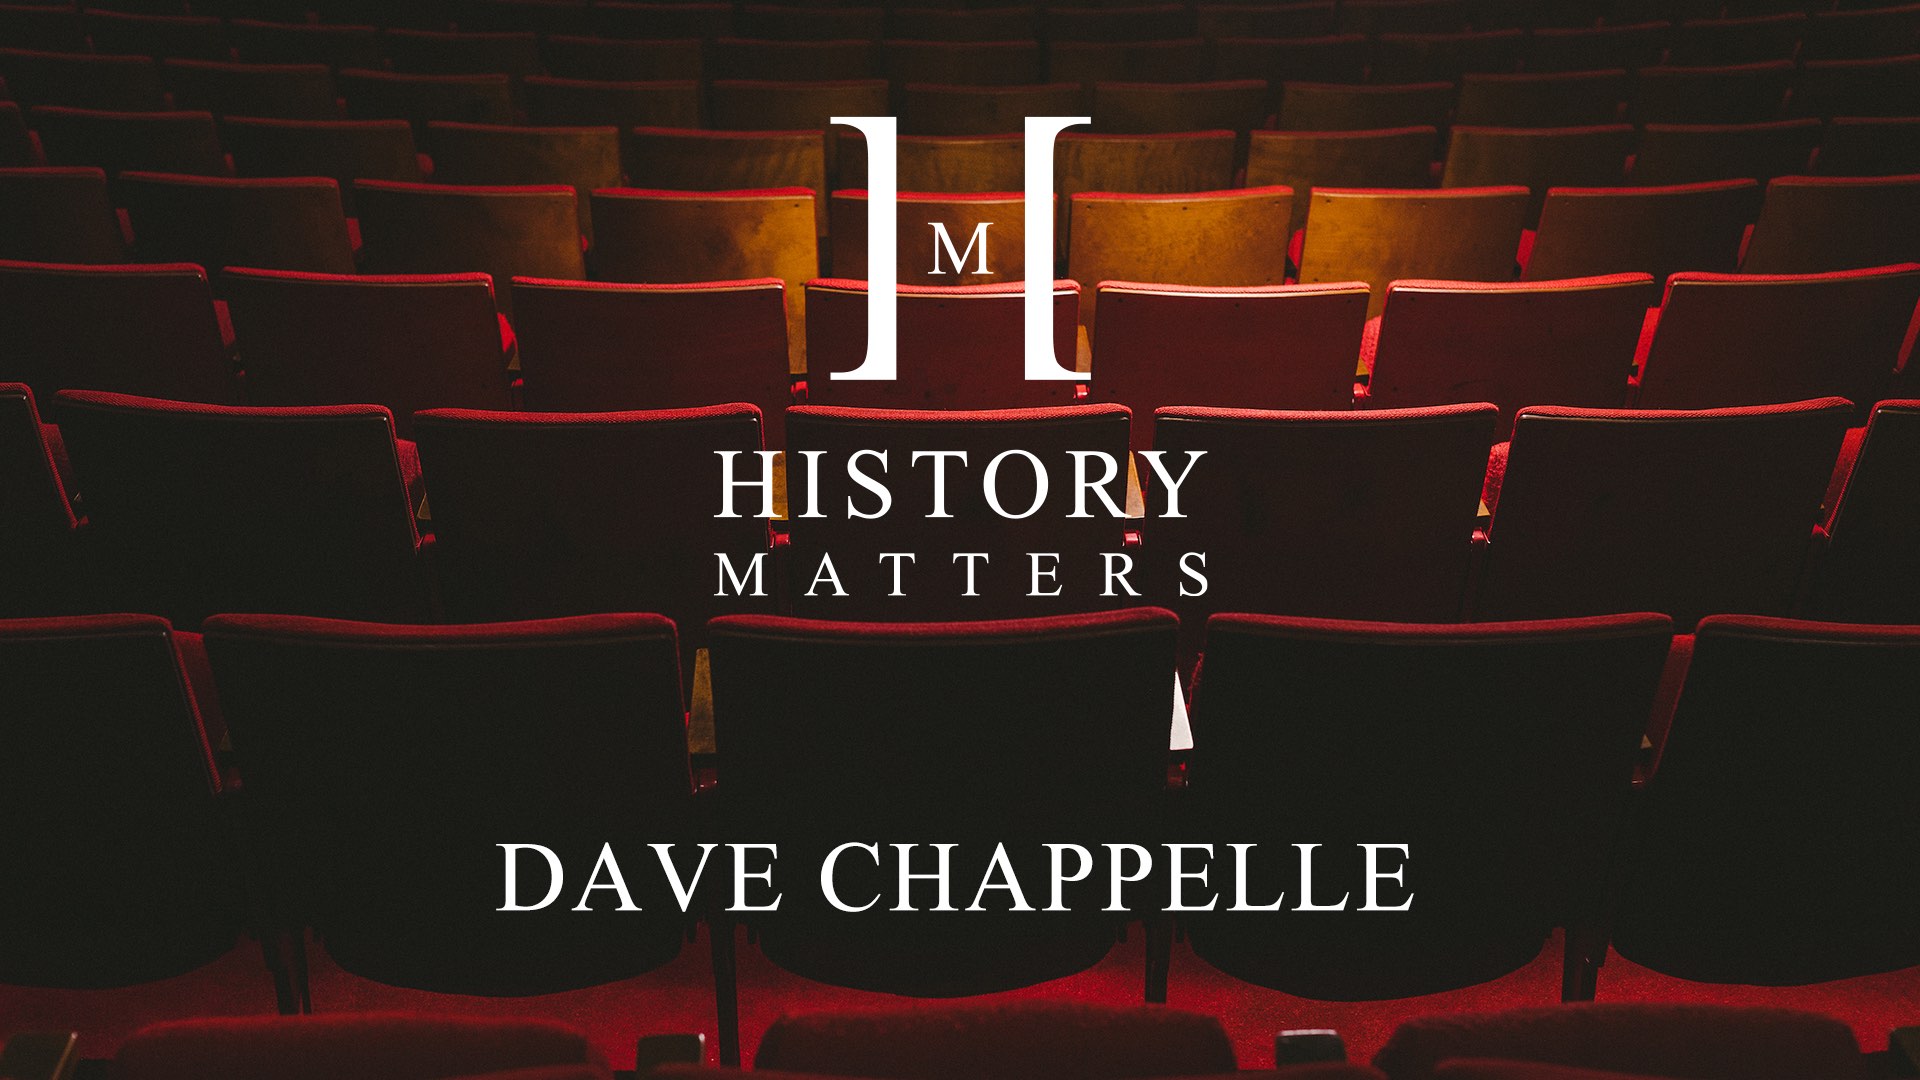 White HM Dave Chappelle logo with background showing movie seats in a movie theater